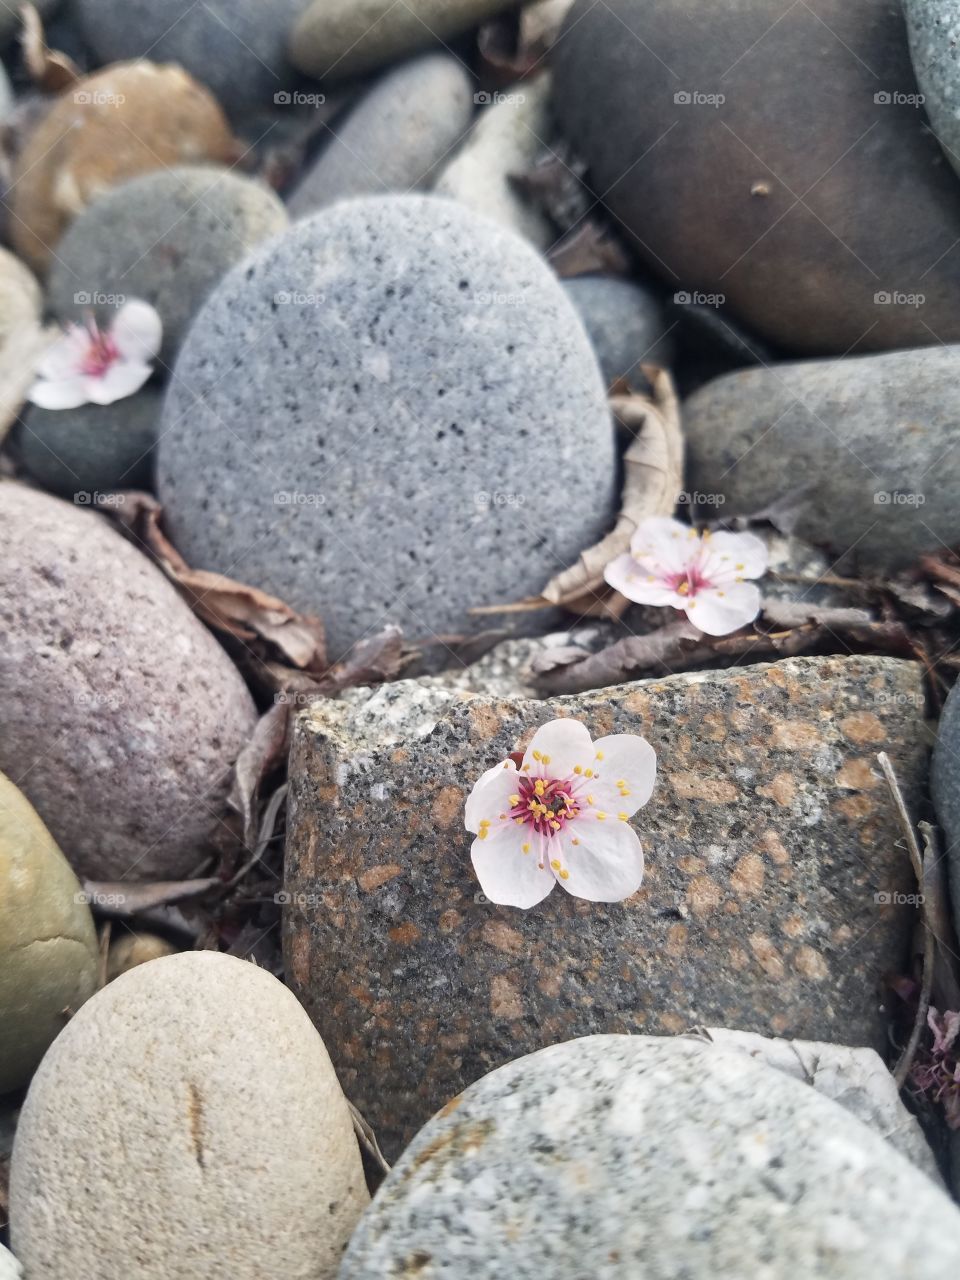 Floral and Stones